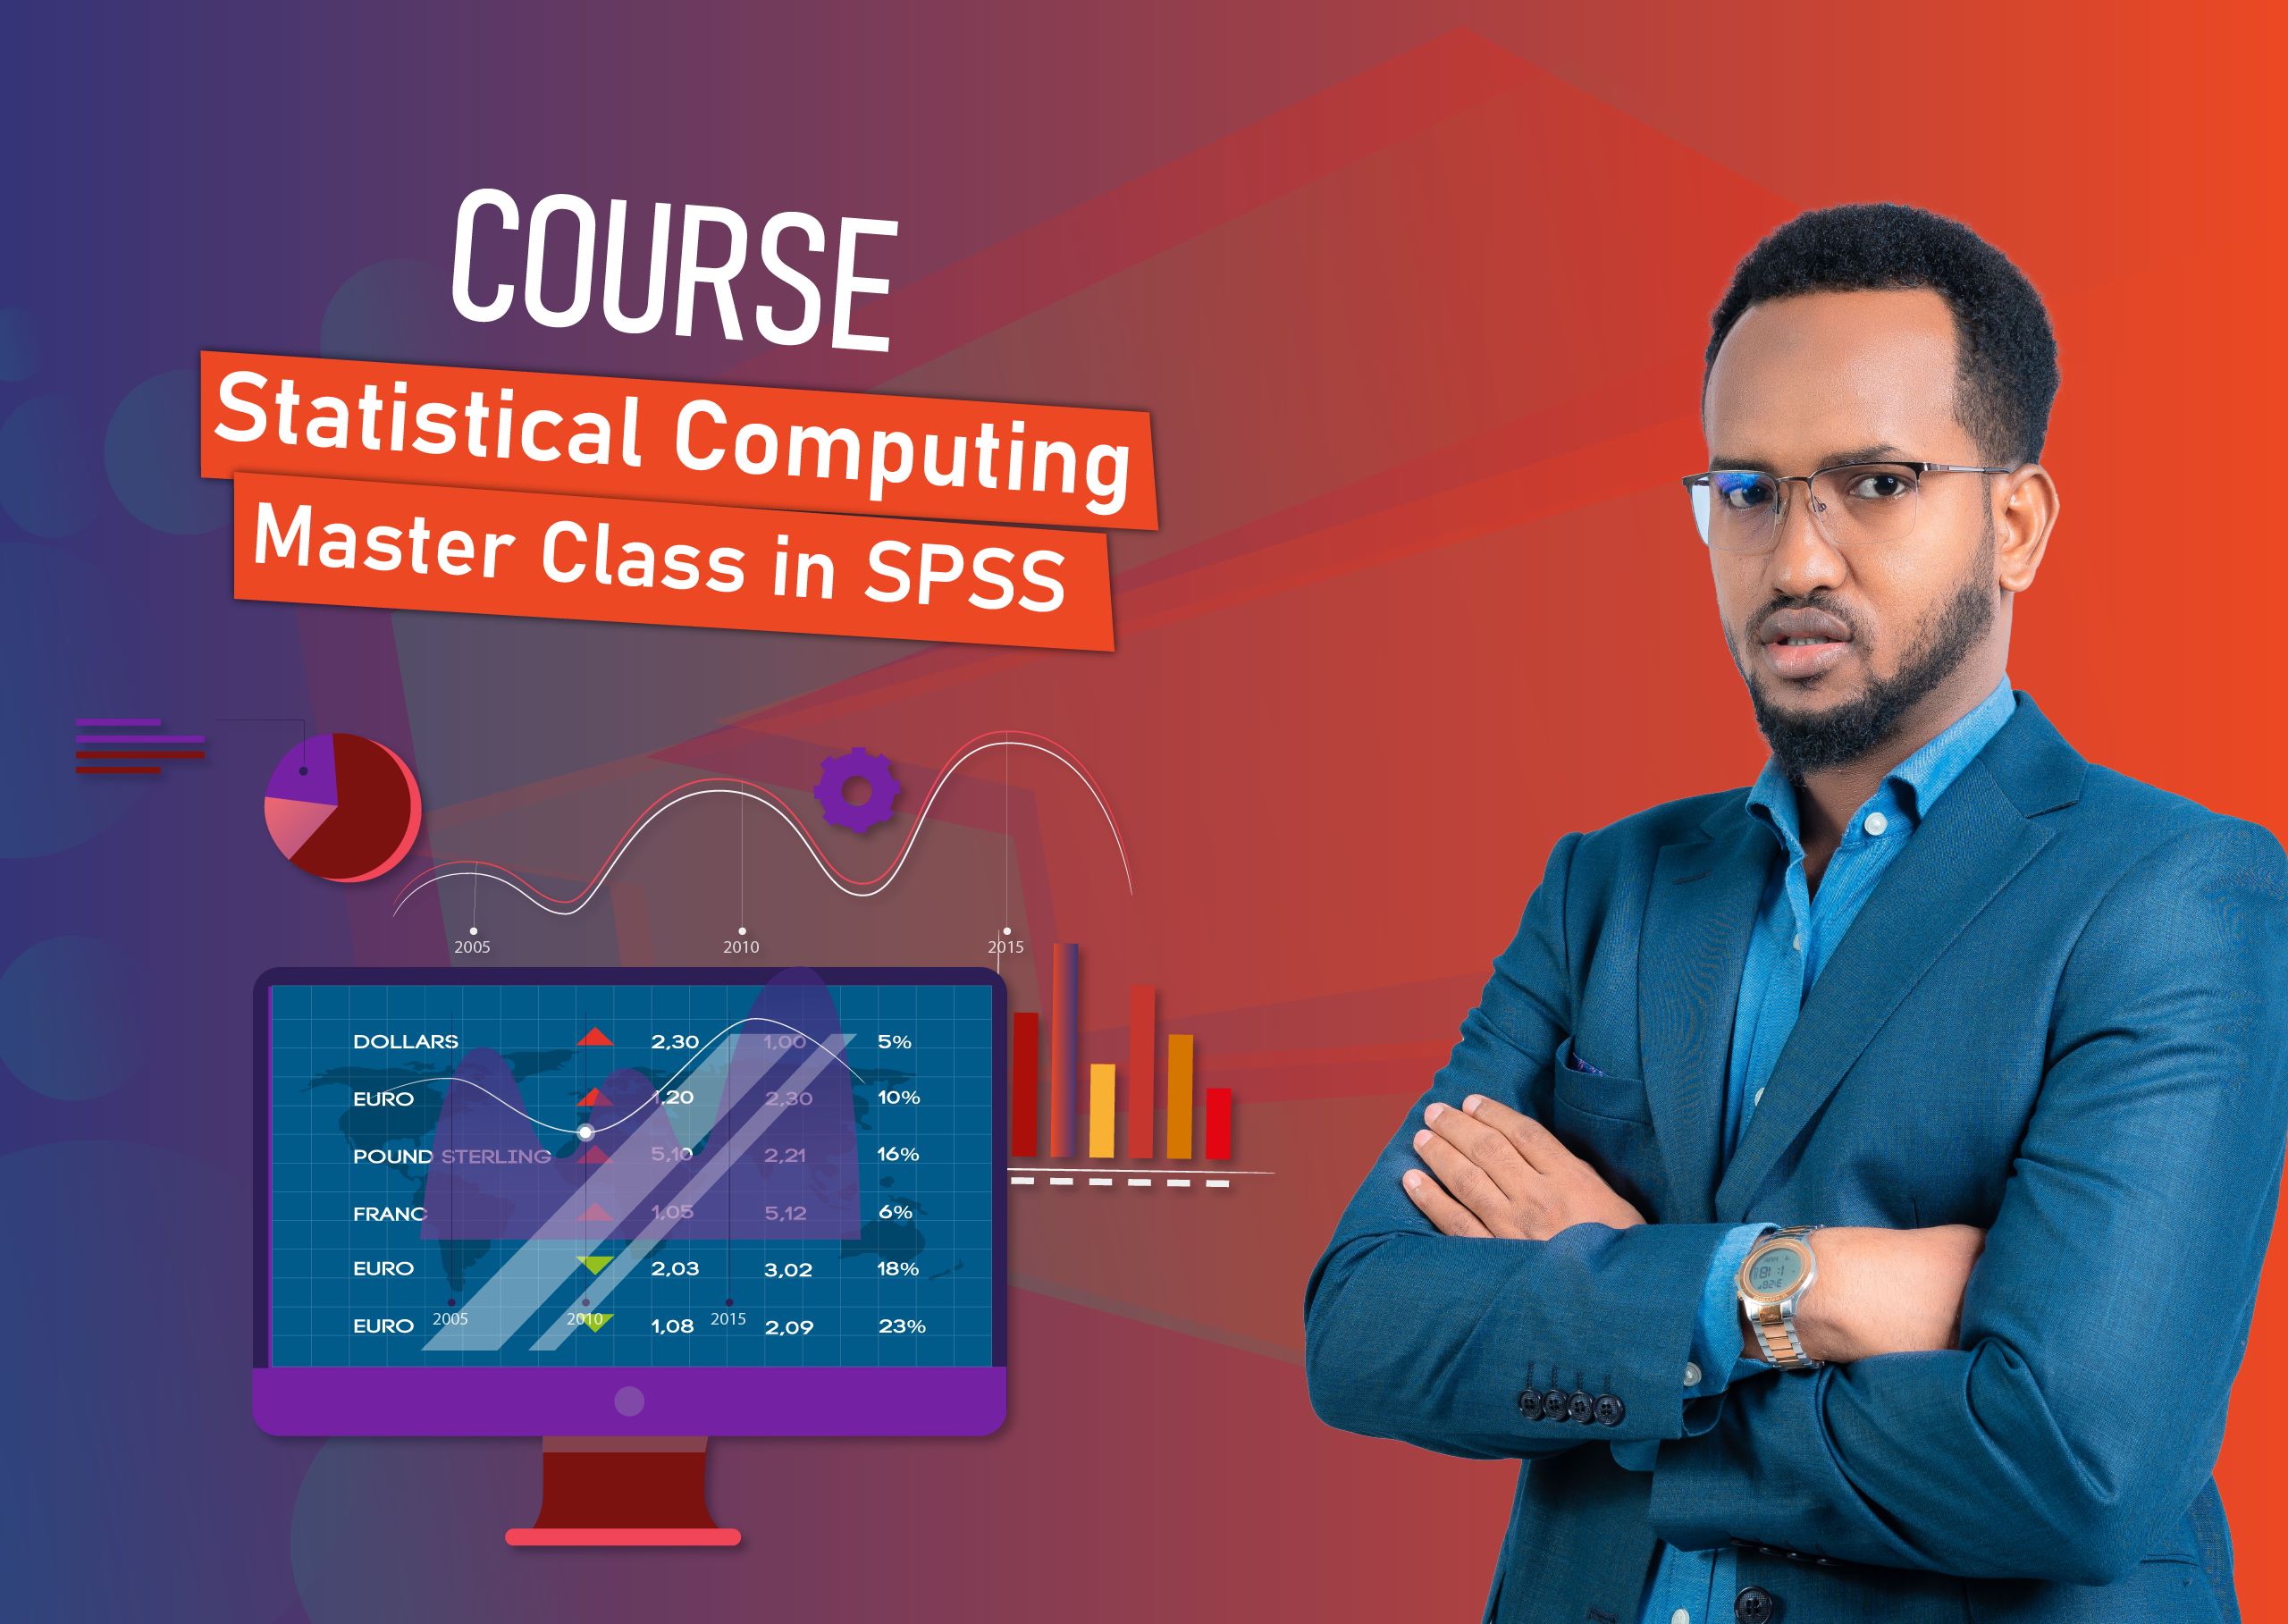 Statistical Computing Master Class in SPSS